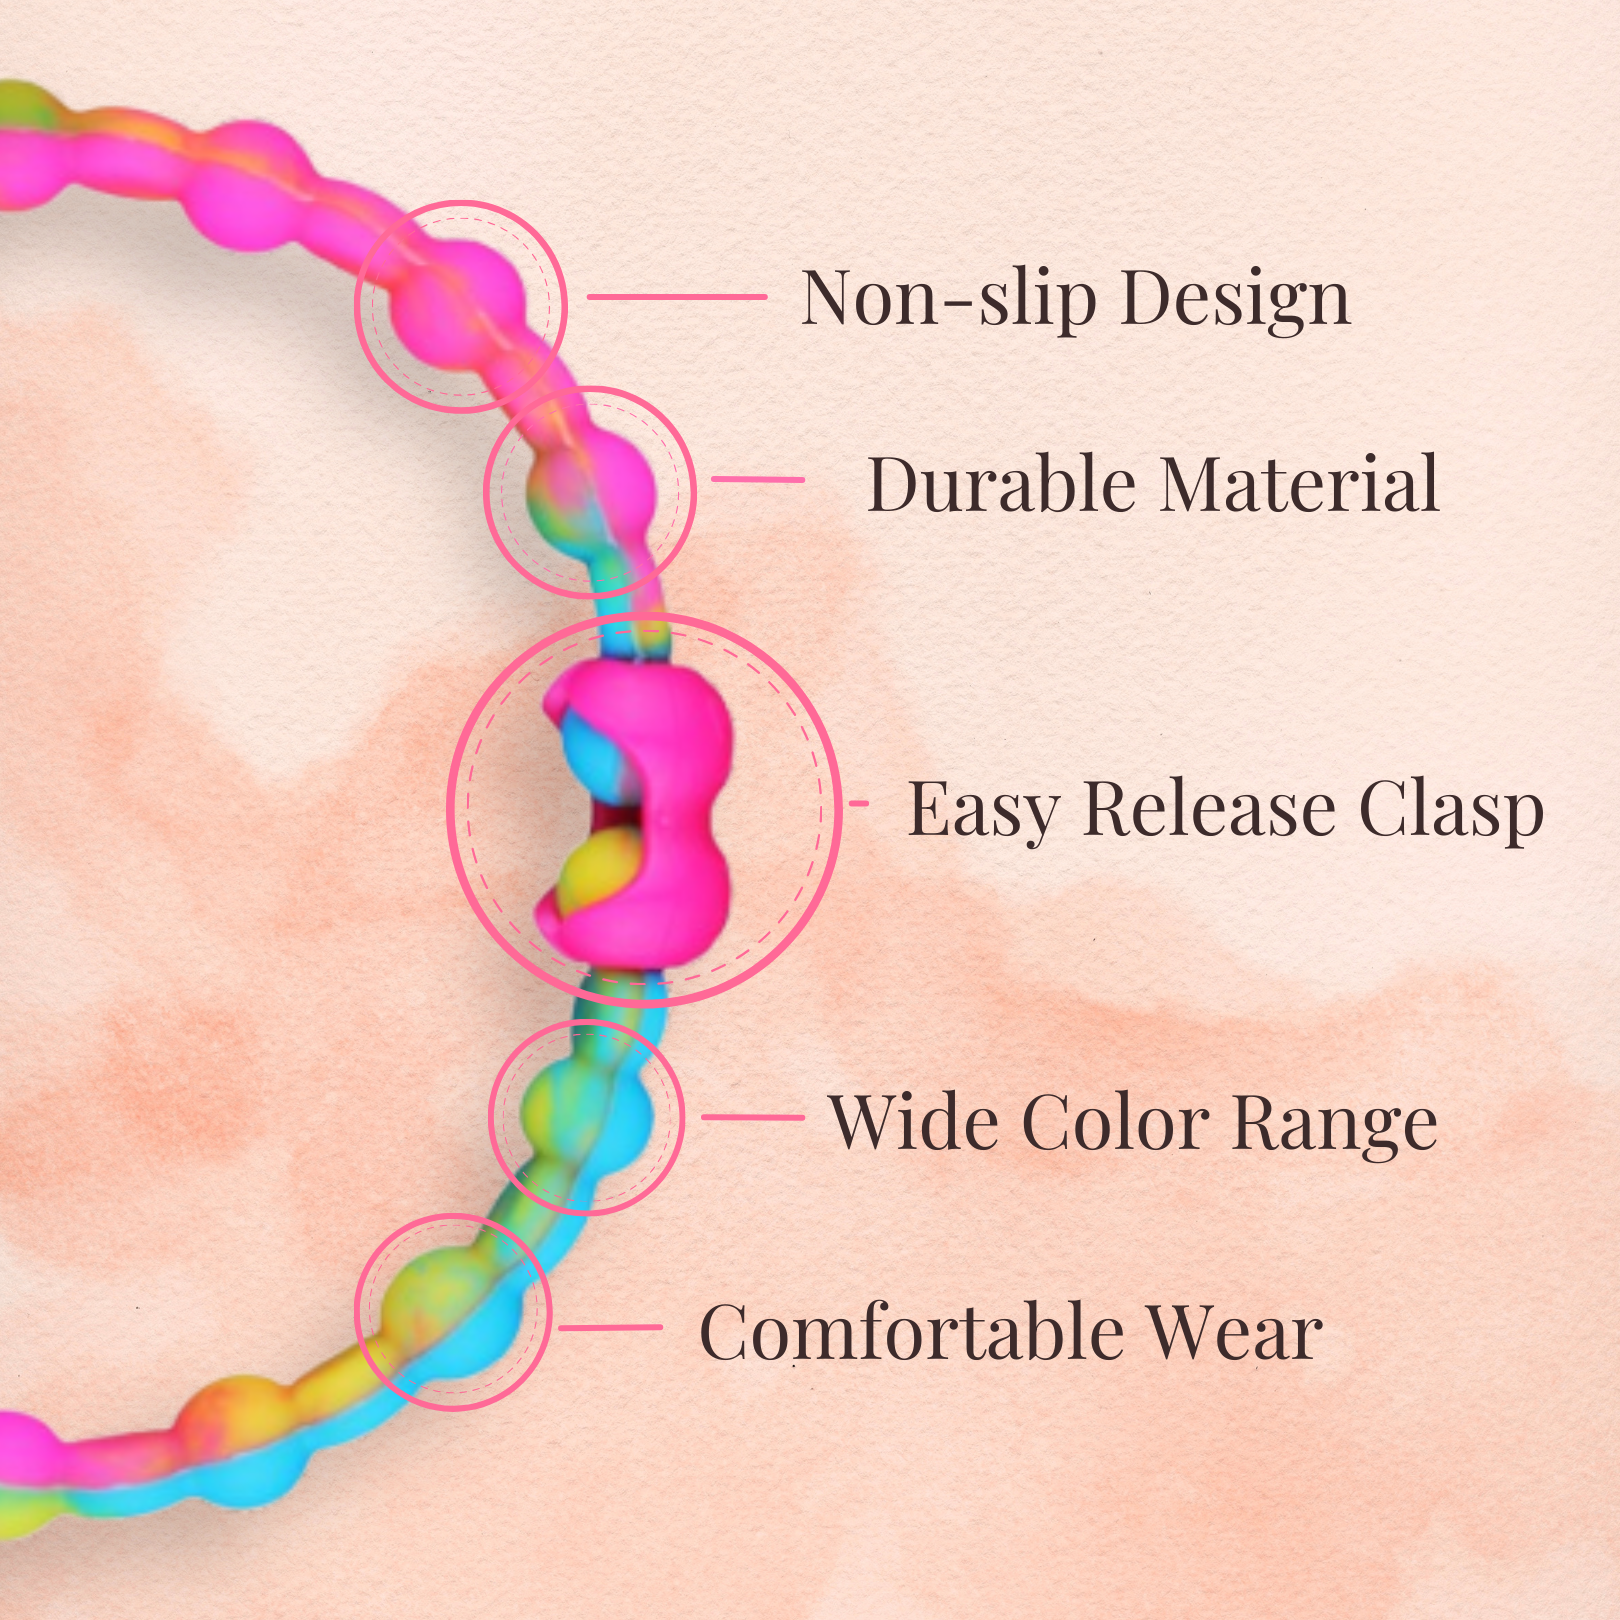 Autumn Spice Pack PRO Hair Ties: Easy Release Adjustable for Every Hair Type PACK OF 8